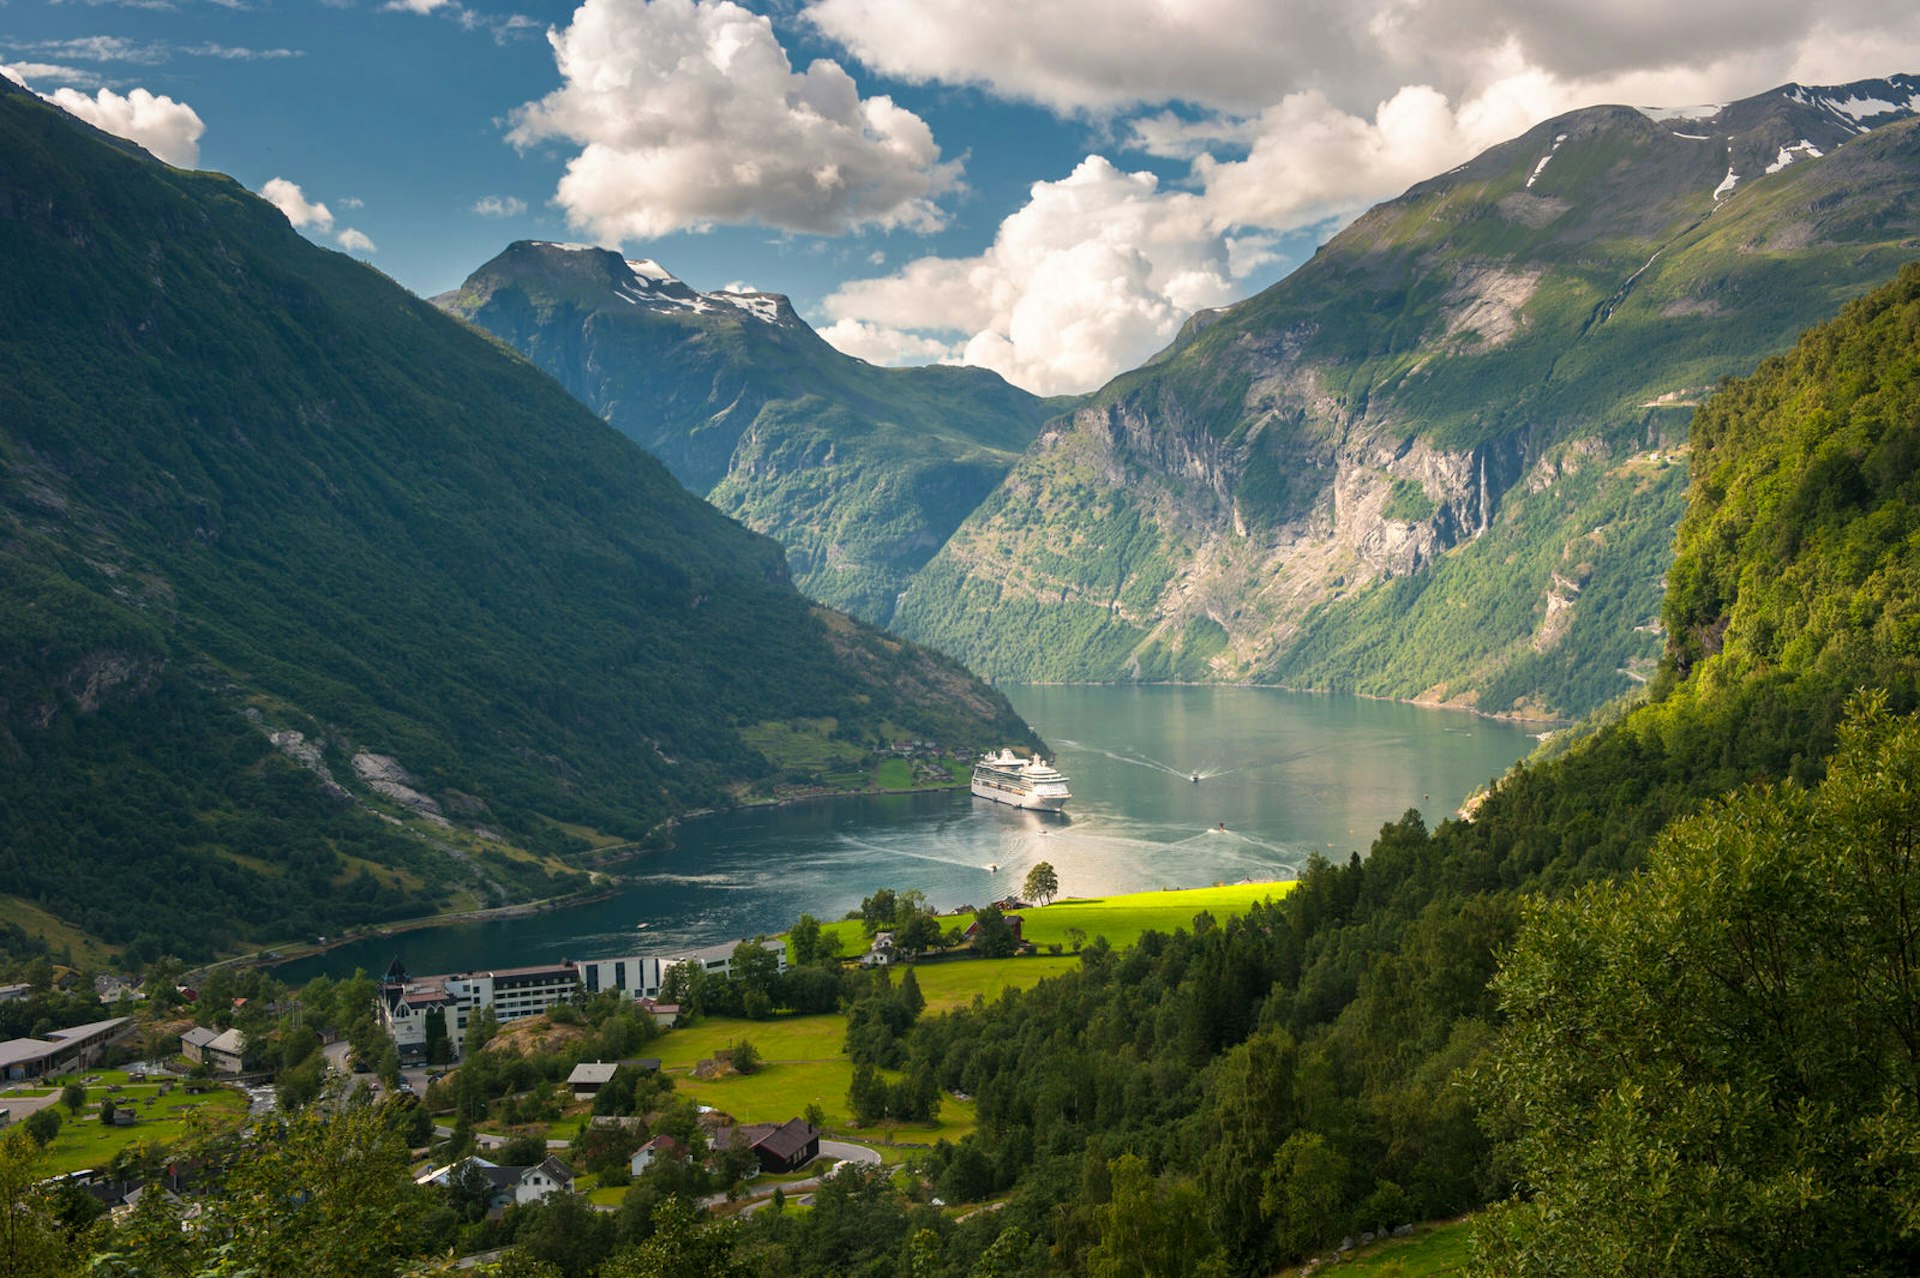 Geiranger fjord, Norway, with cruise ship visible on the water